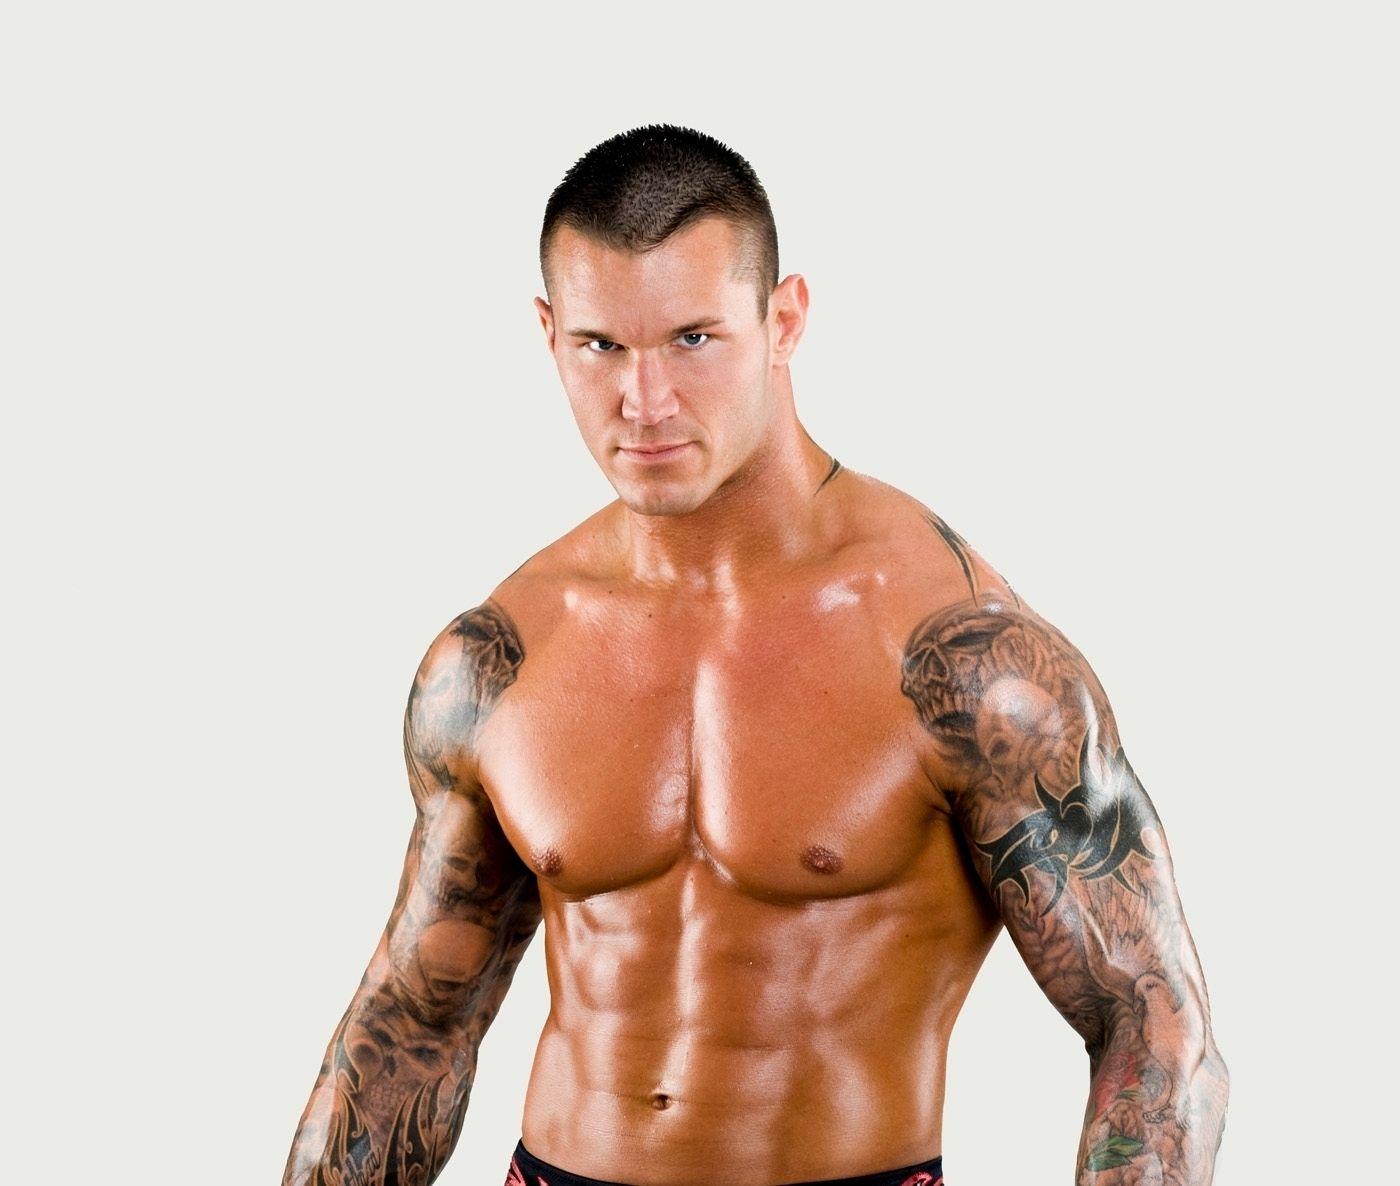 Randy Orton image the viper HD wallpaper and background photo